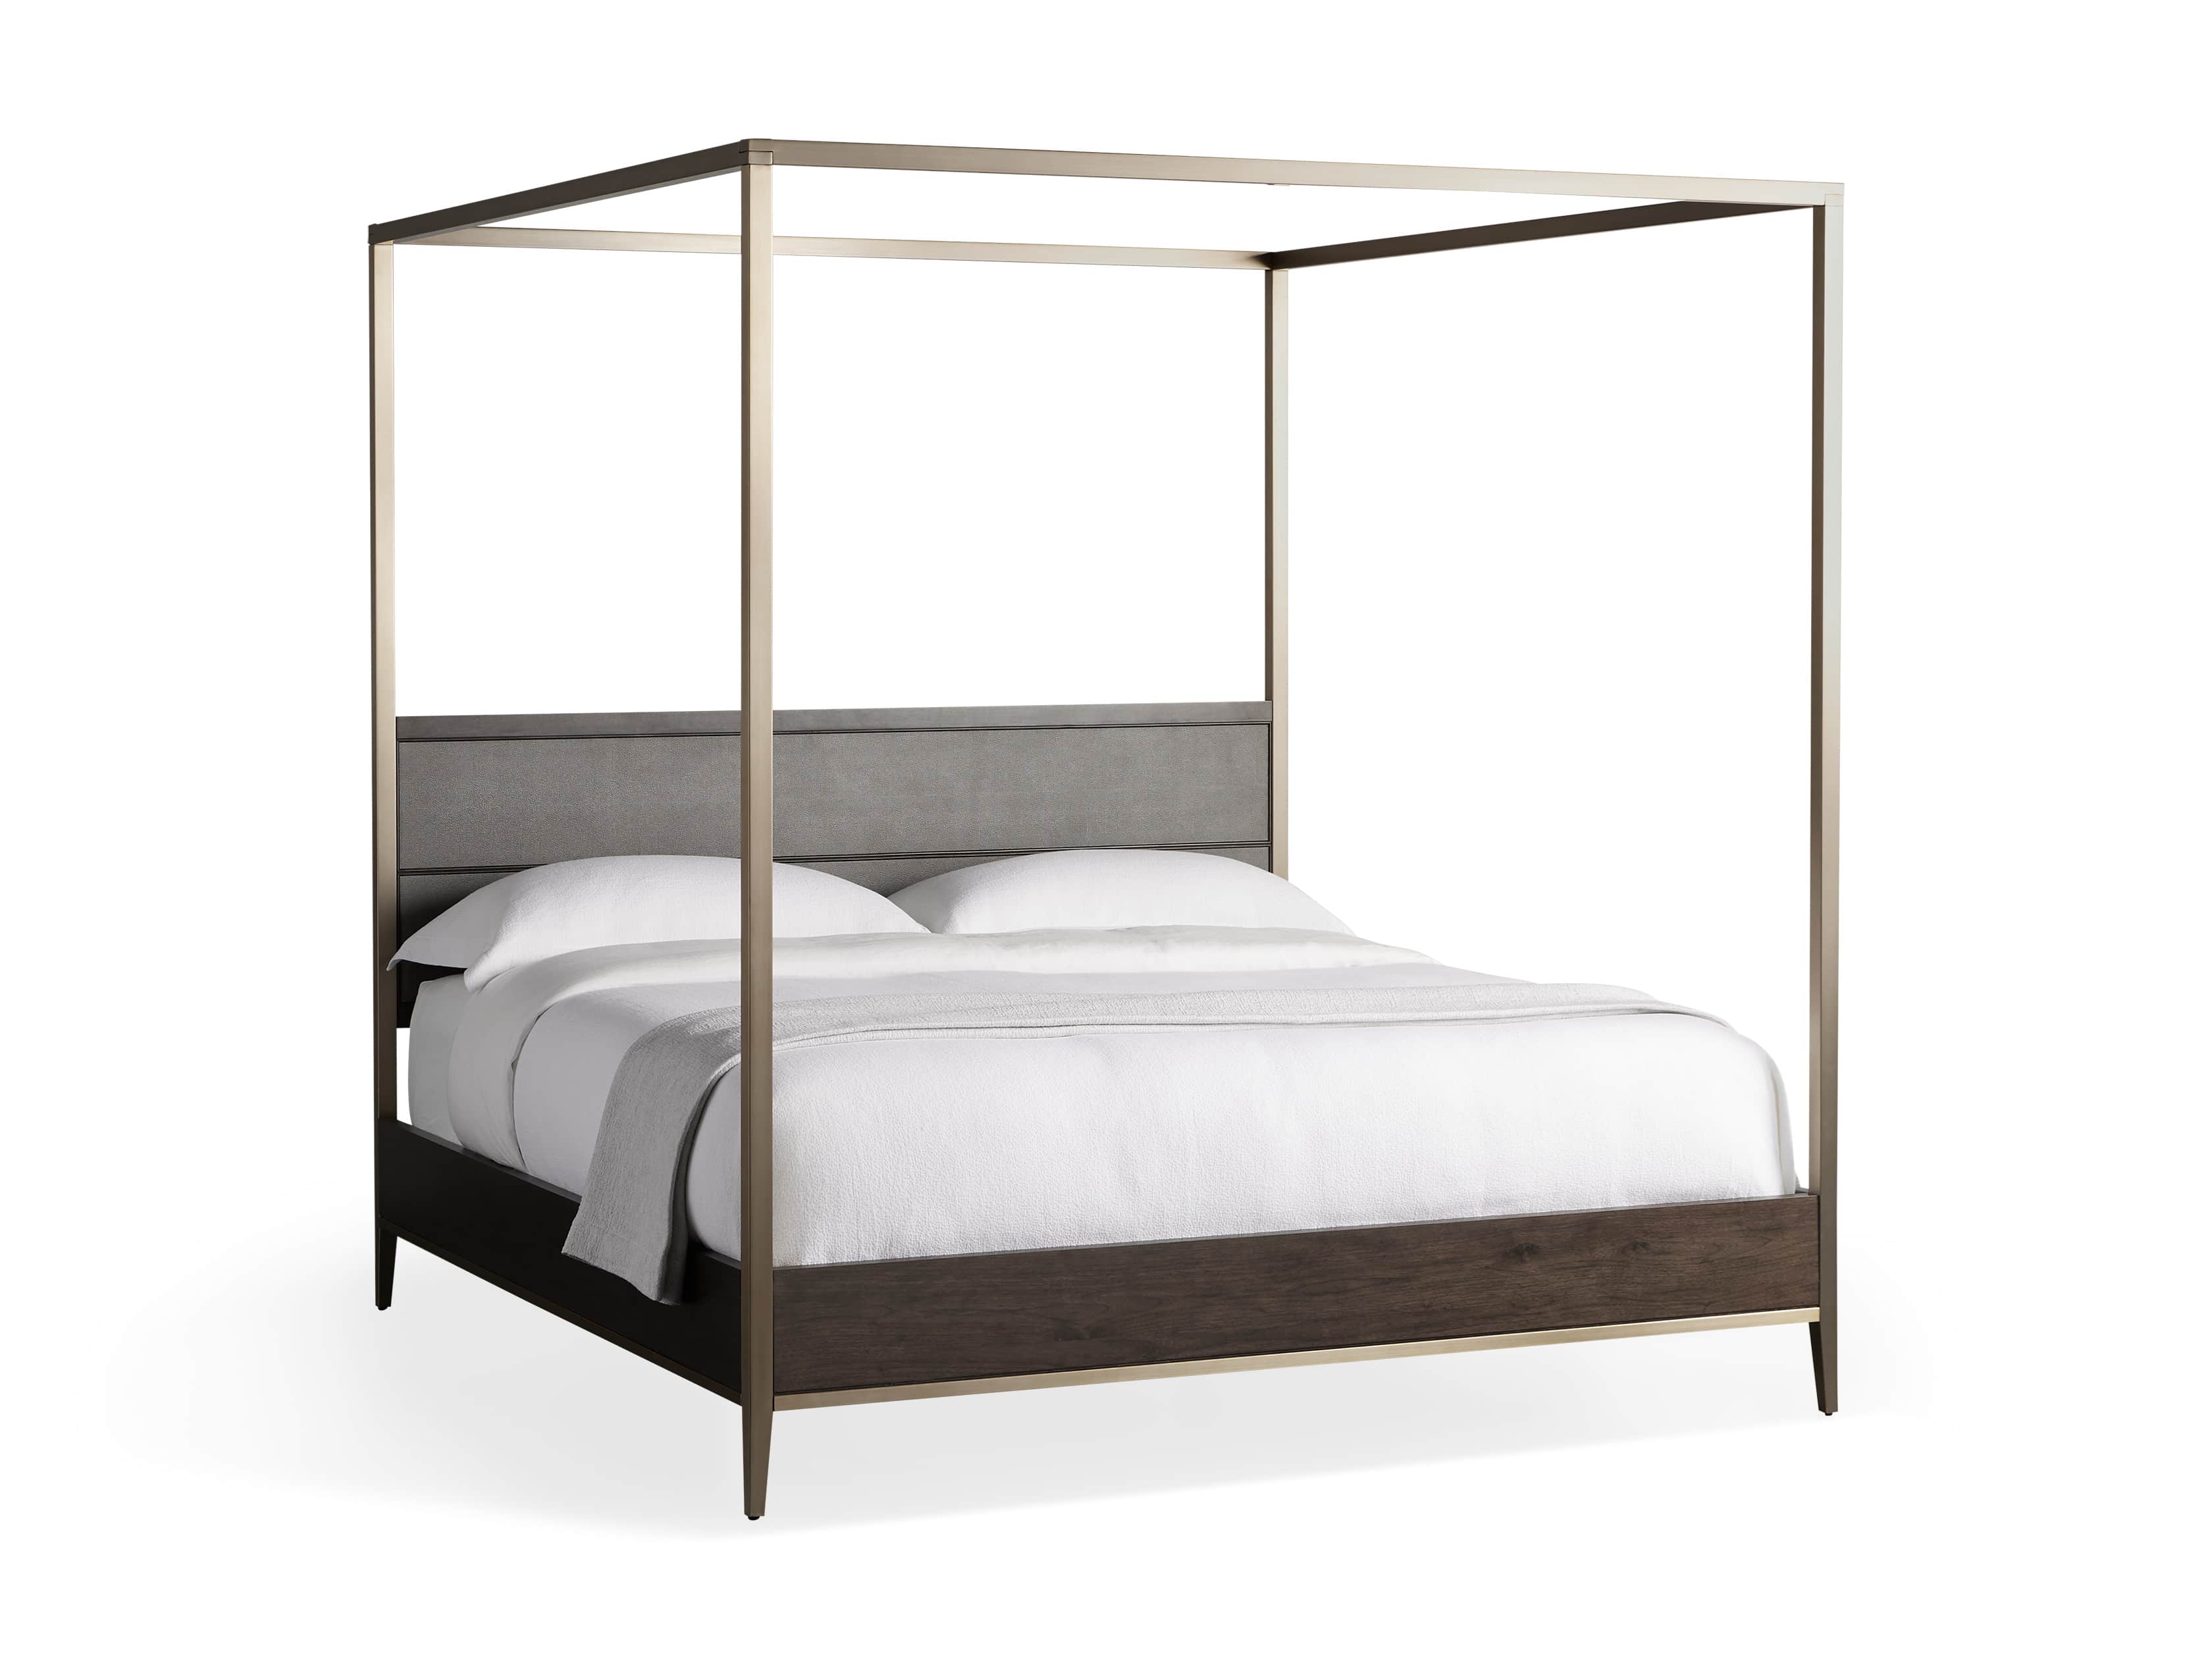 Malone Canopy Bed Arhaus, Queen Canopy Poster Bed